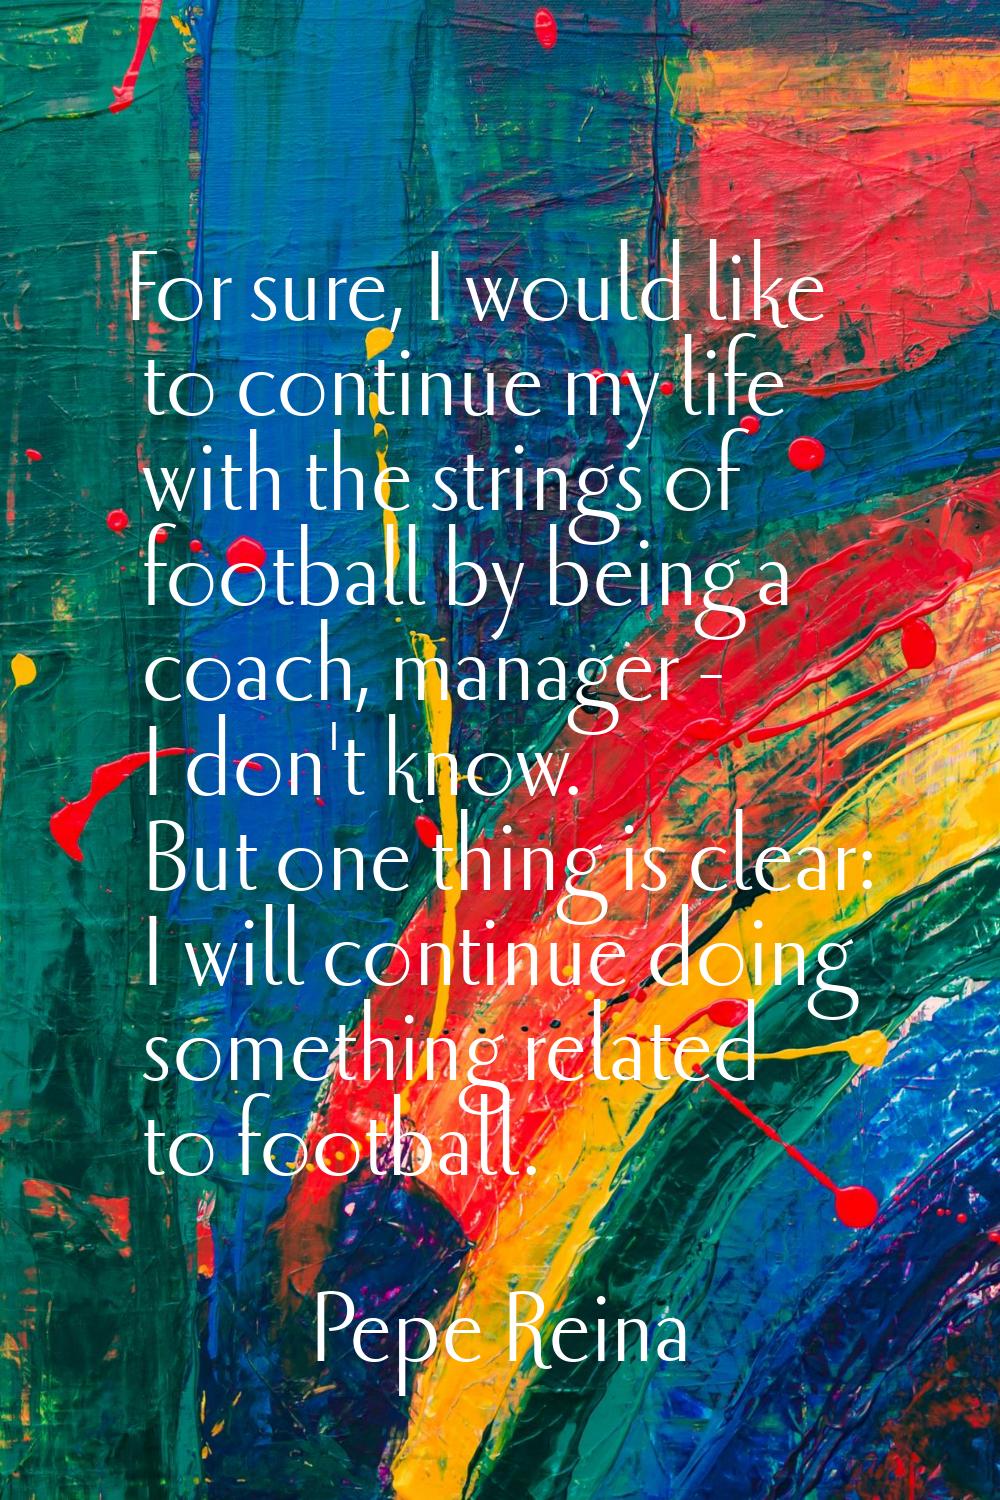 For sure, I would like to continue my life with the strings of football by being a coach, manager -